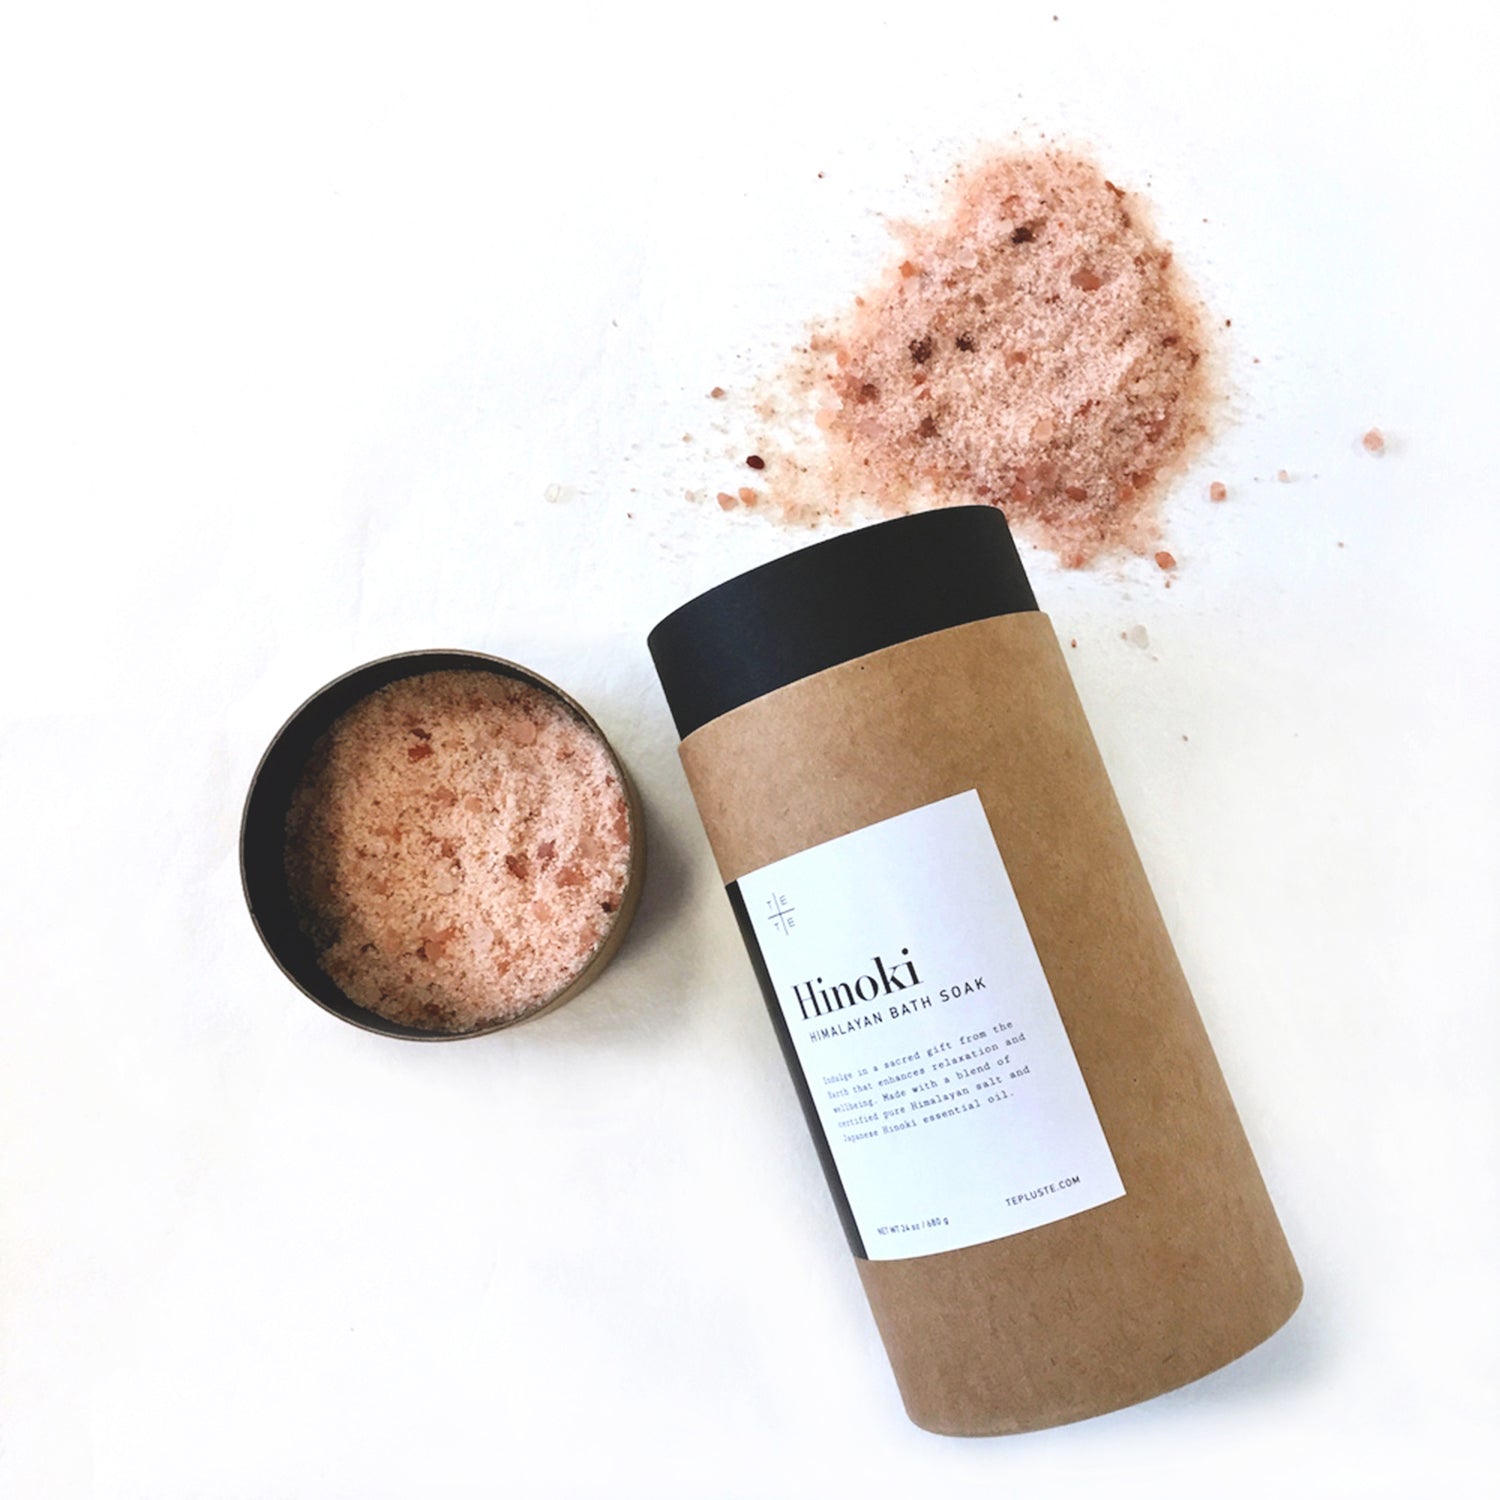 Te Plus Te Hinoki Himalayan Bath Soak  Made with a blend of certified pure Himalayan salt and Hinoki essential oil. Now it comes with a mix of three different sizes of salt crystals for longer lasting hinoki aroma.